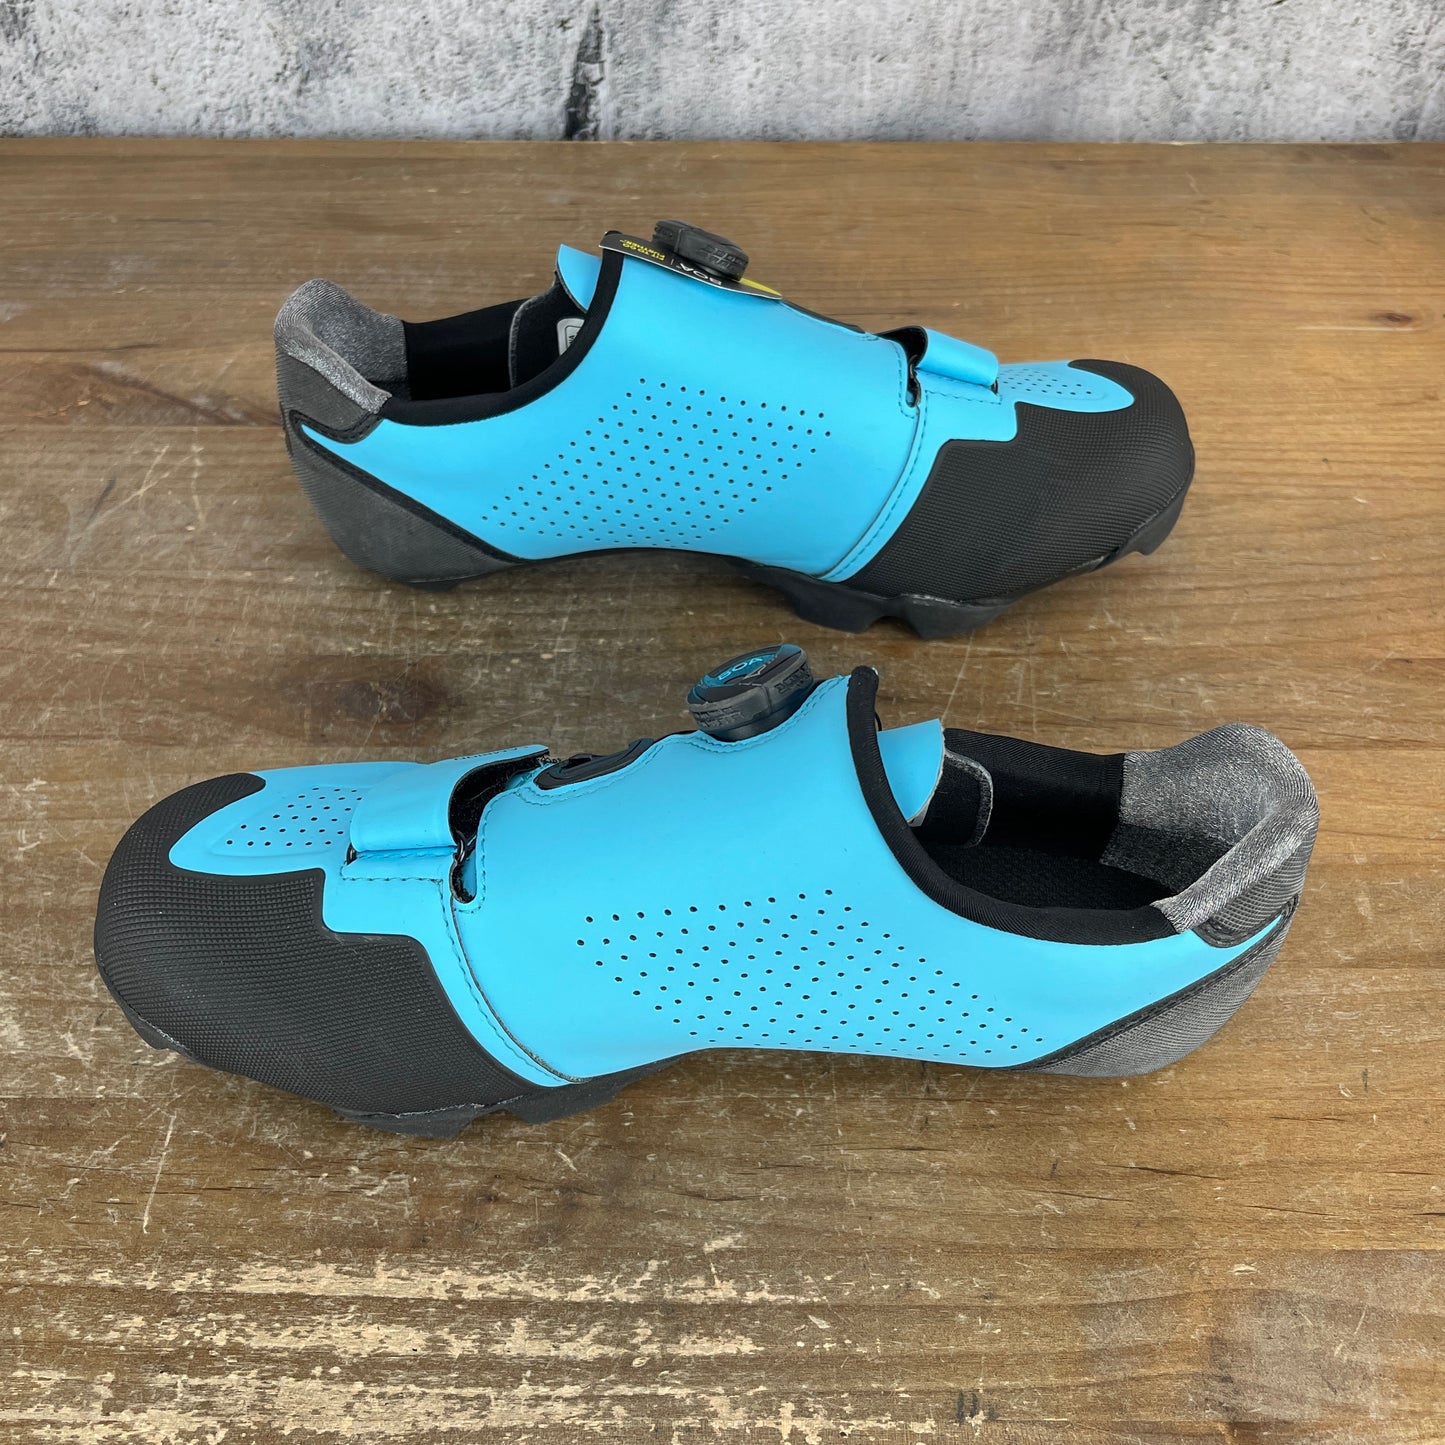 New! Bontrager Cambion MTB Gravel Size EU 41 US 8 Cycling Shoes Blue